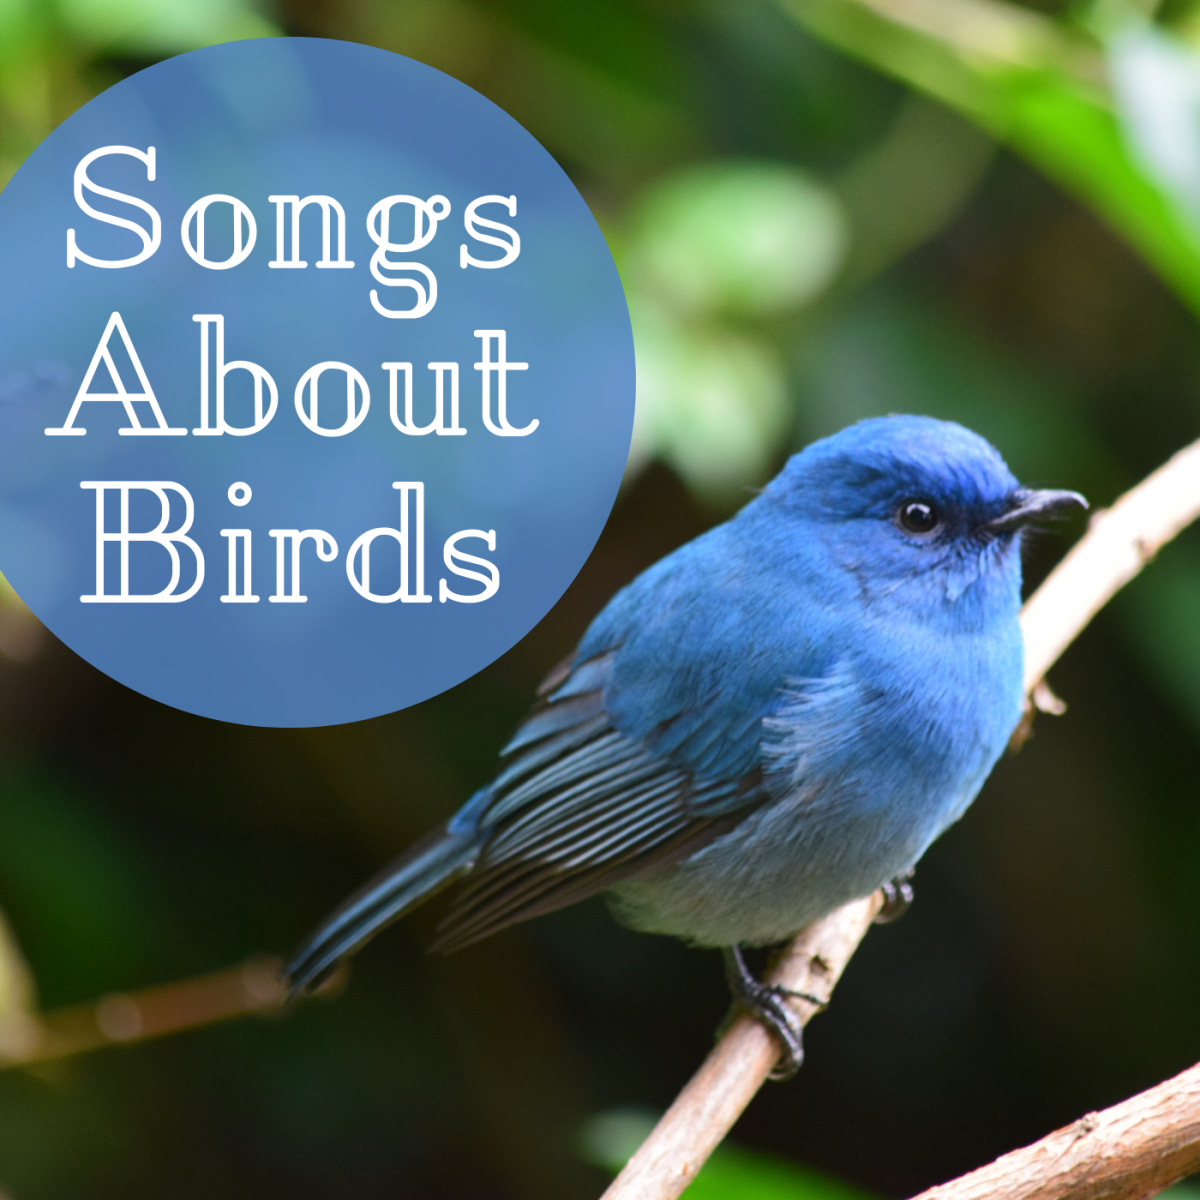 53 Songs About Birds